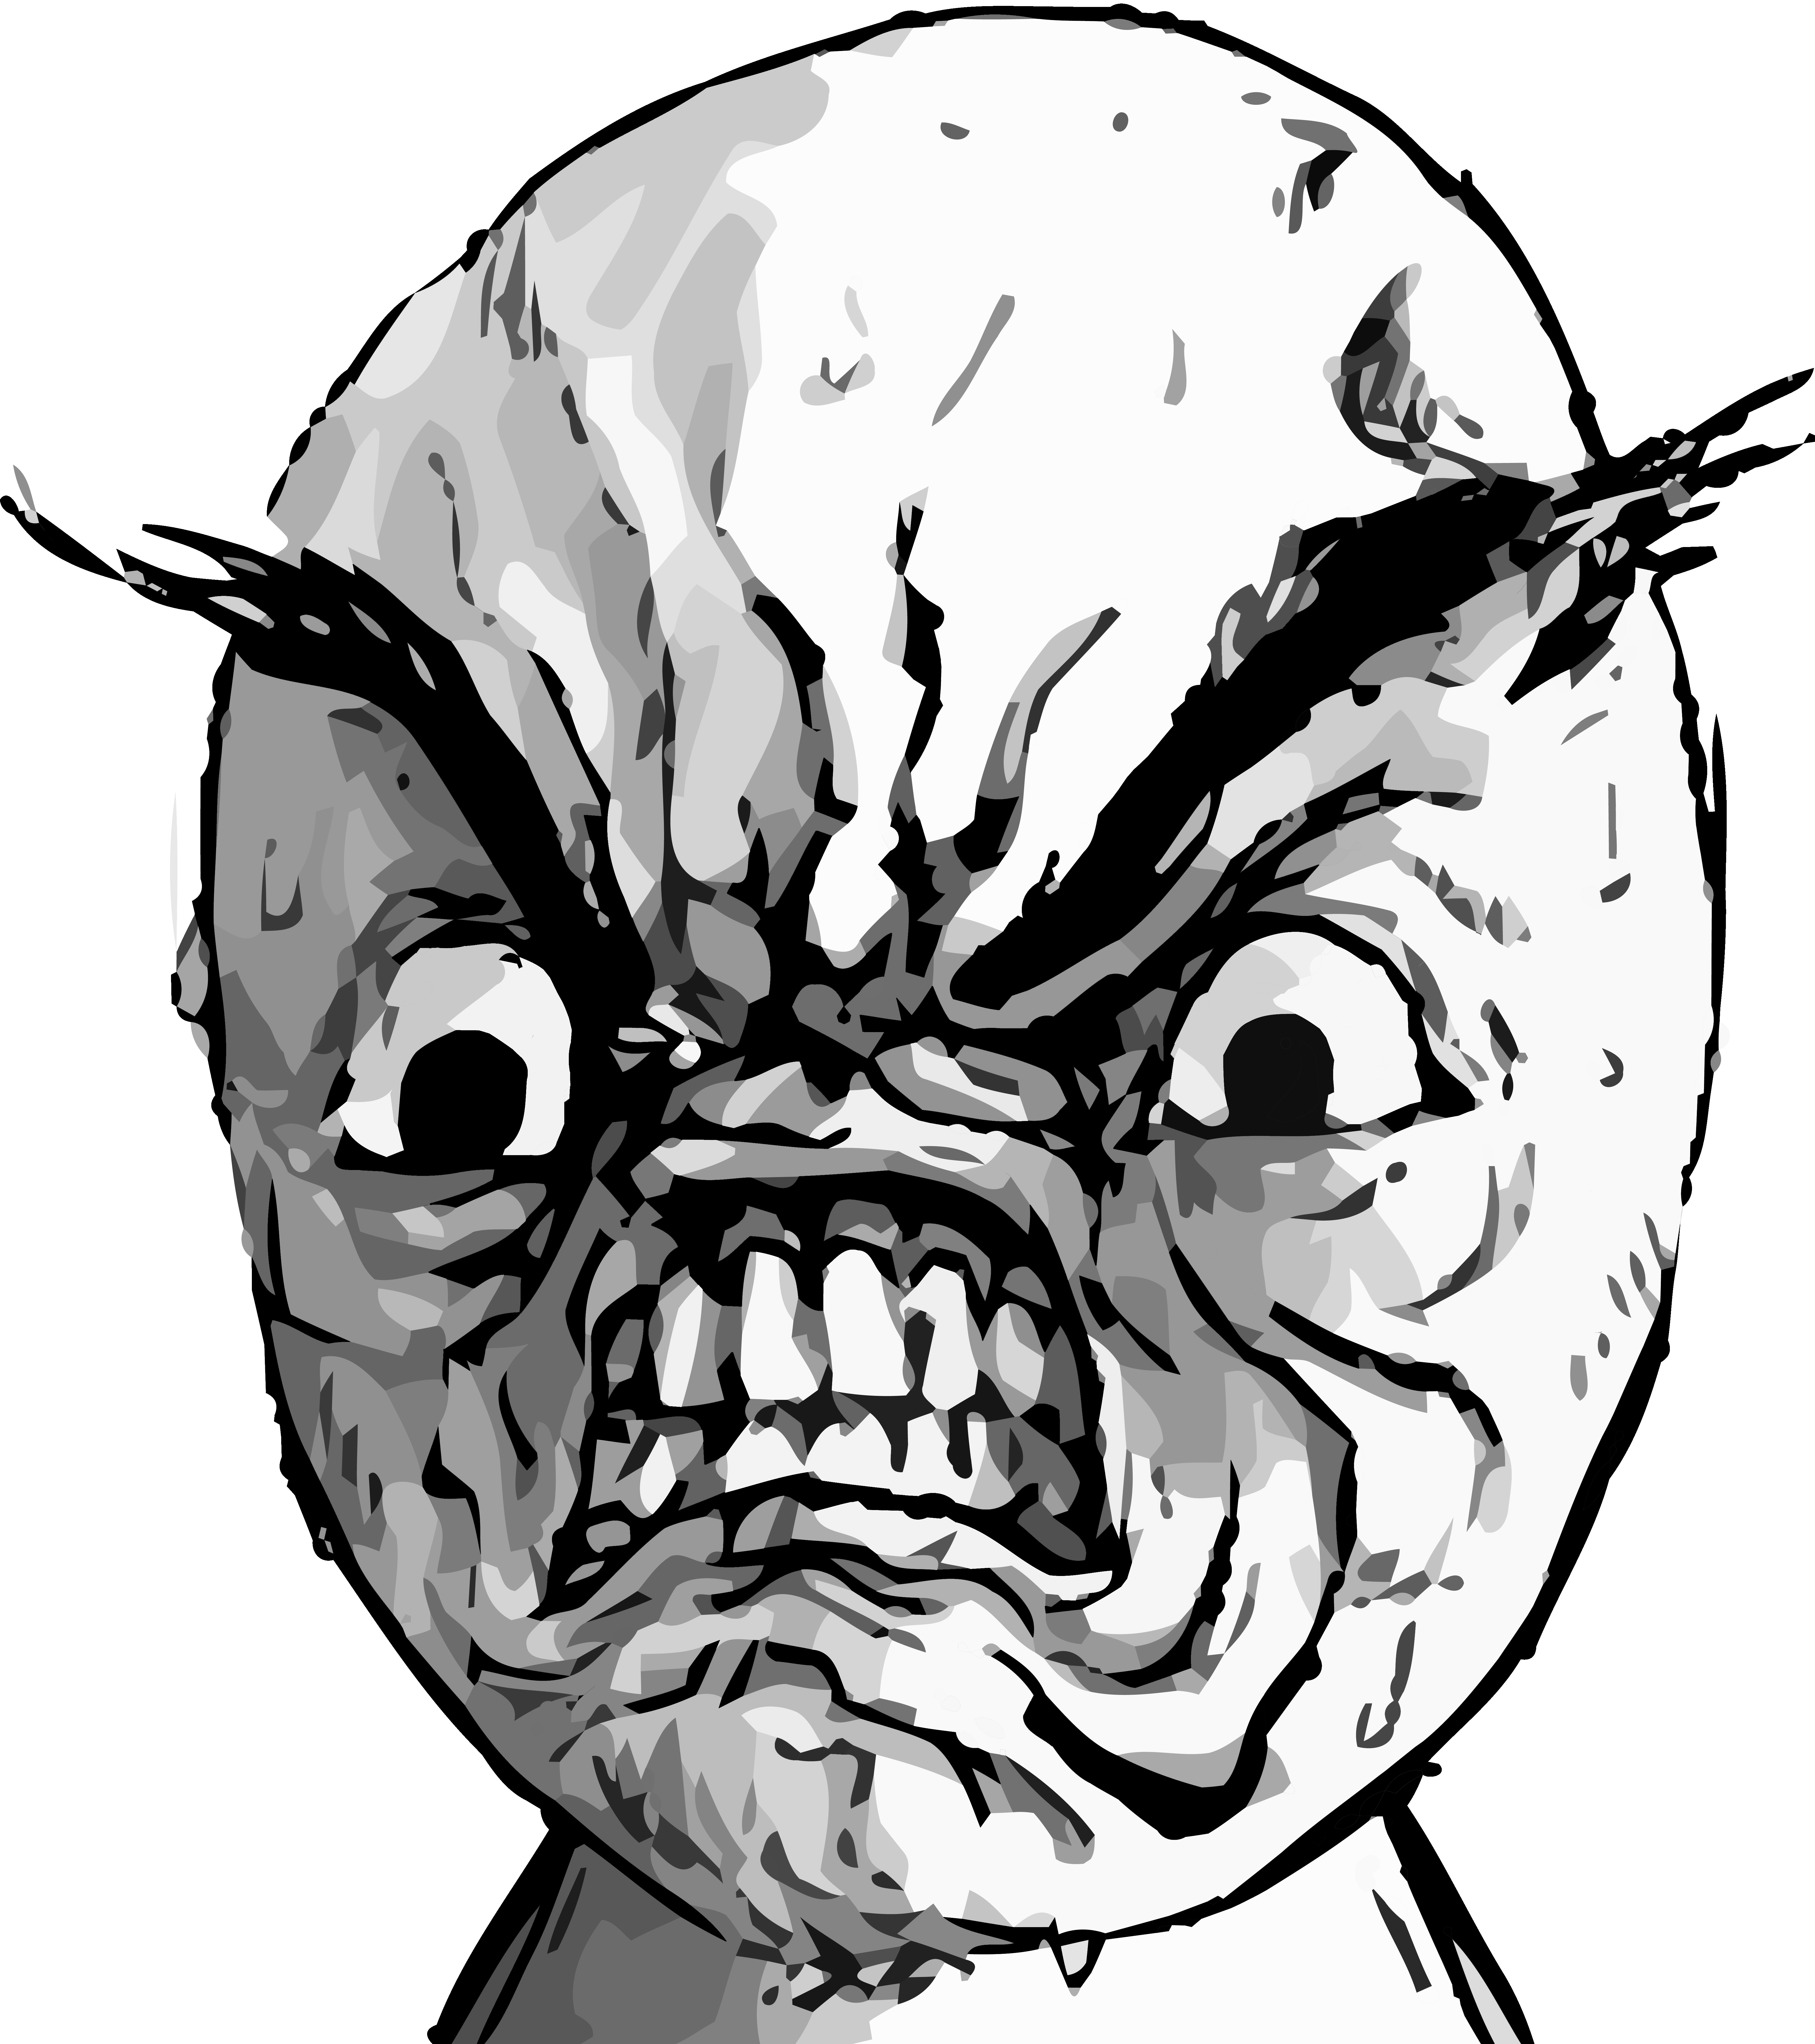 Share this post. rage_face_by_rober_raik-d4e0fxk.png. 